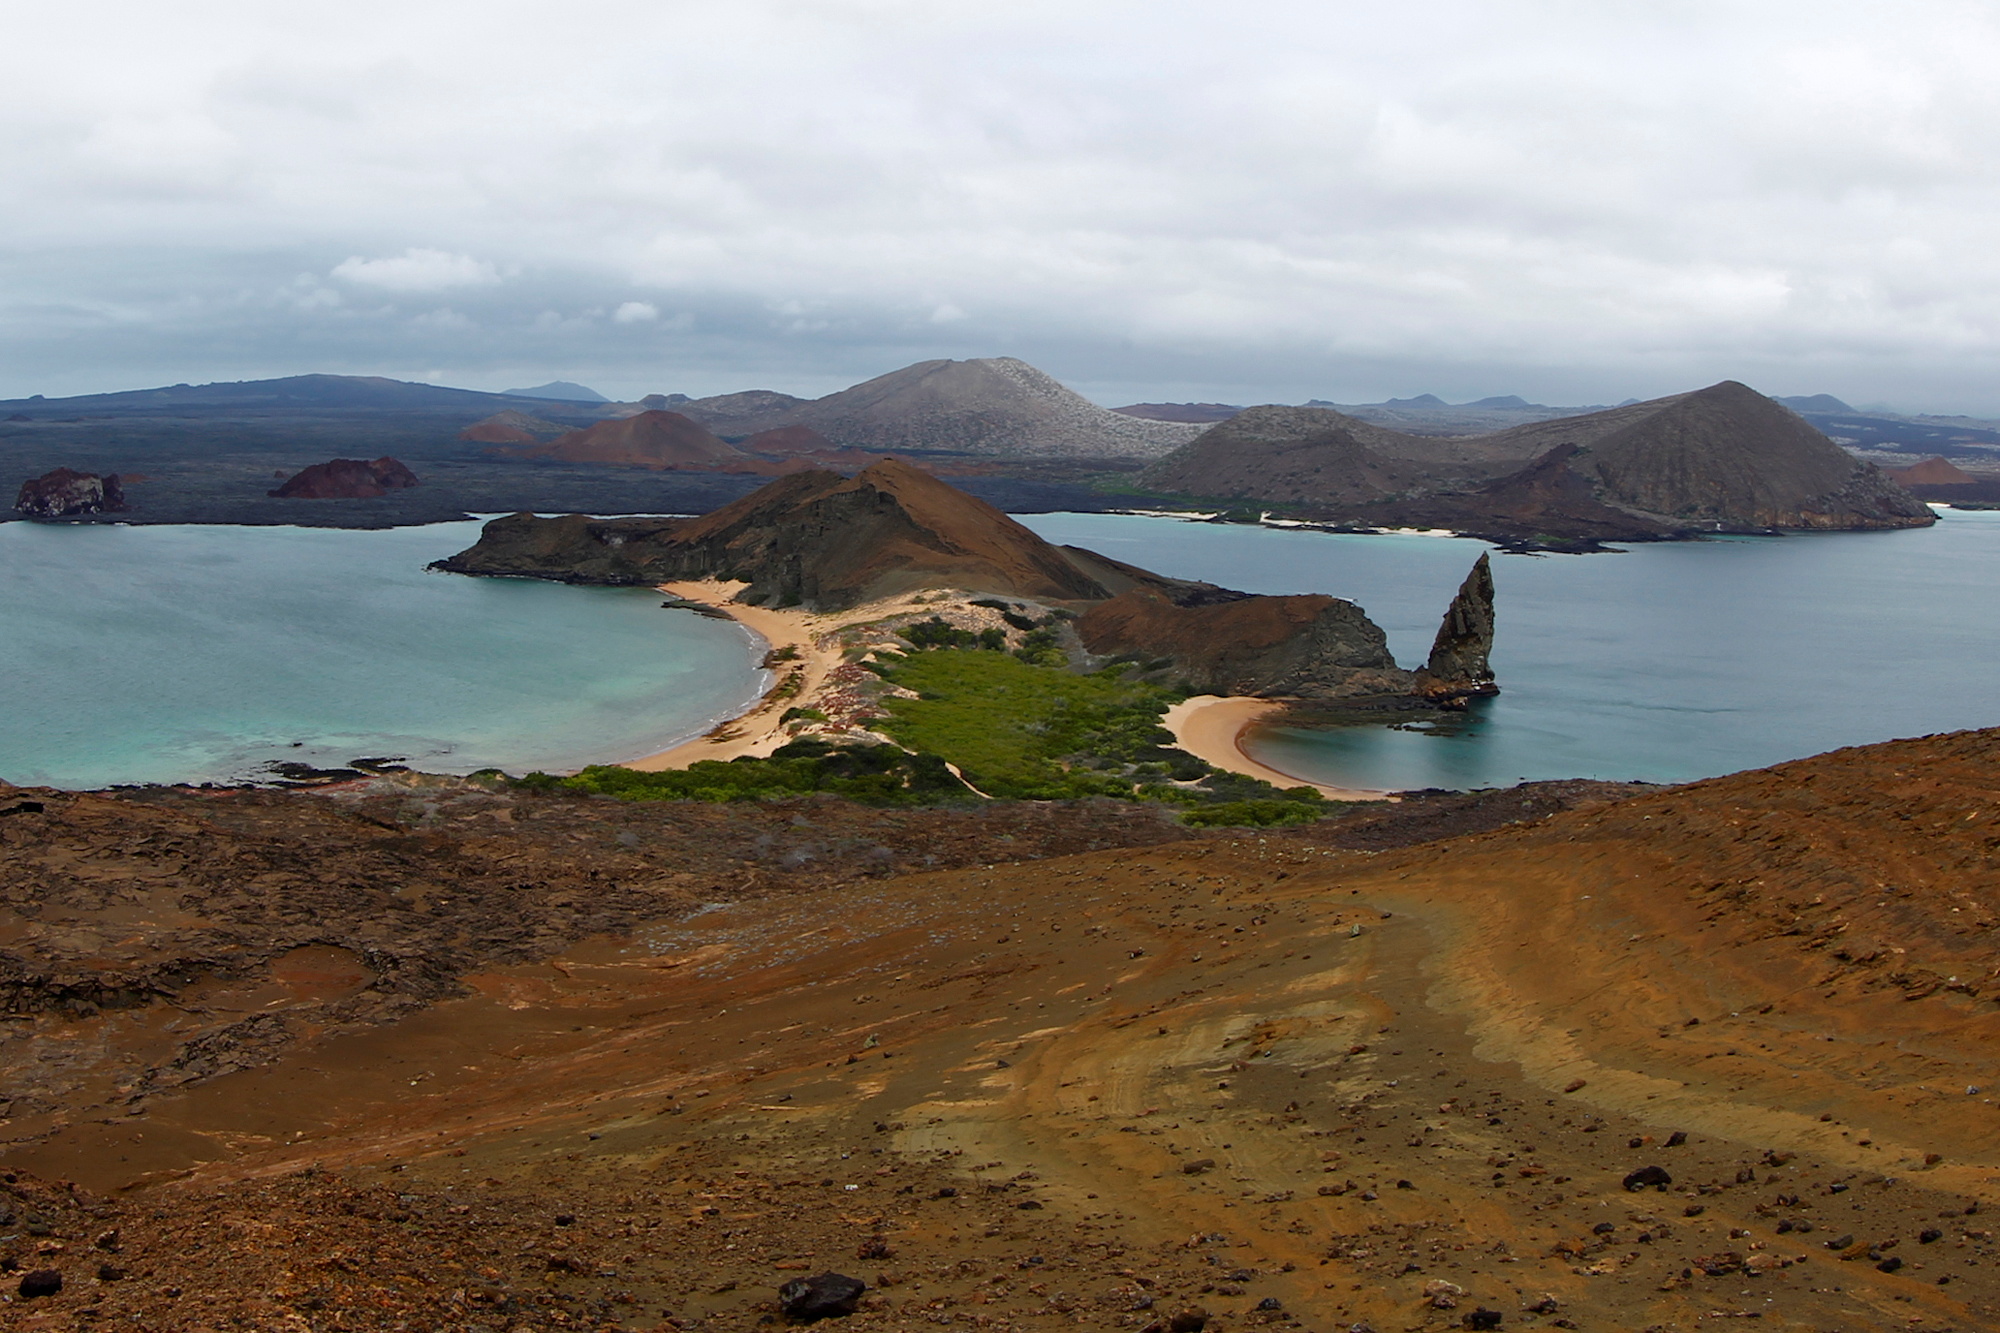 The view from the top of Bartolome Island in Galapagos